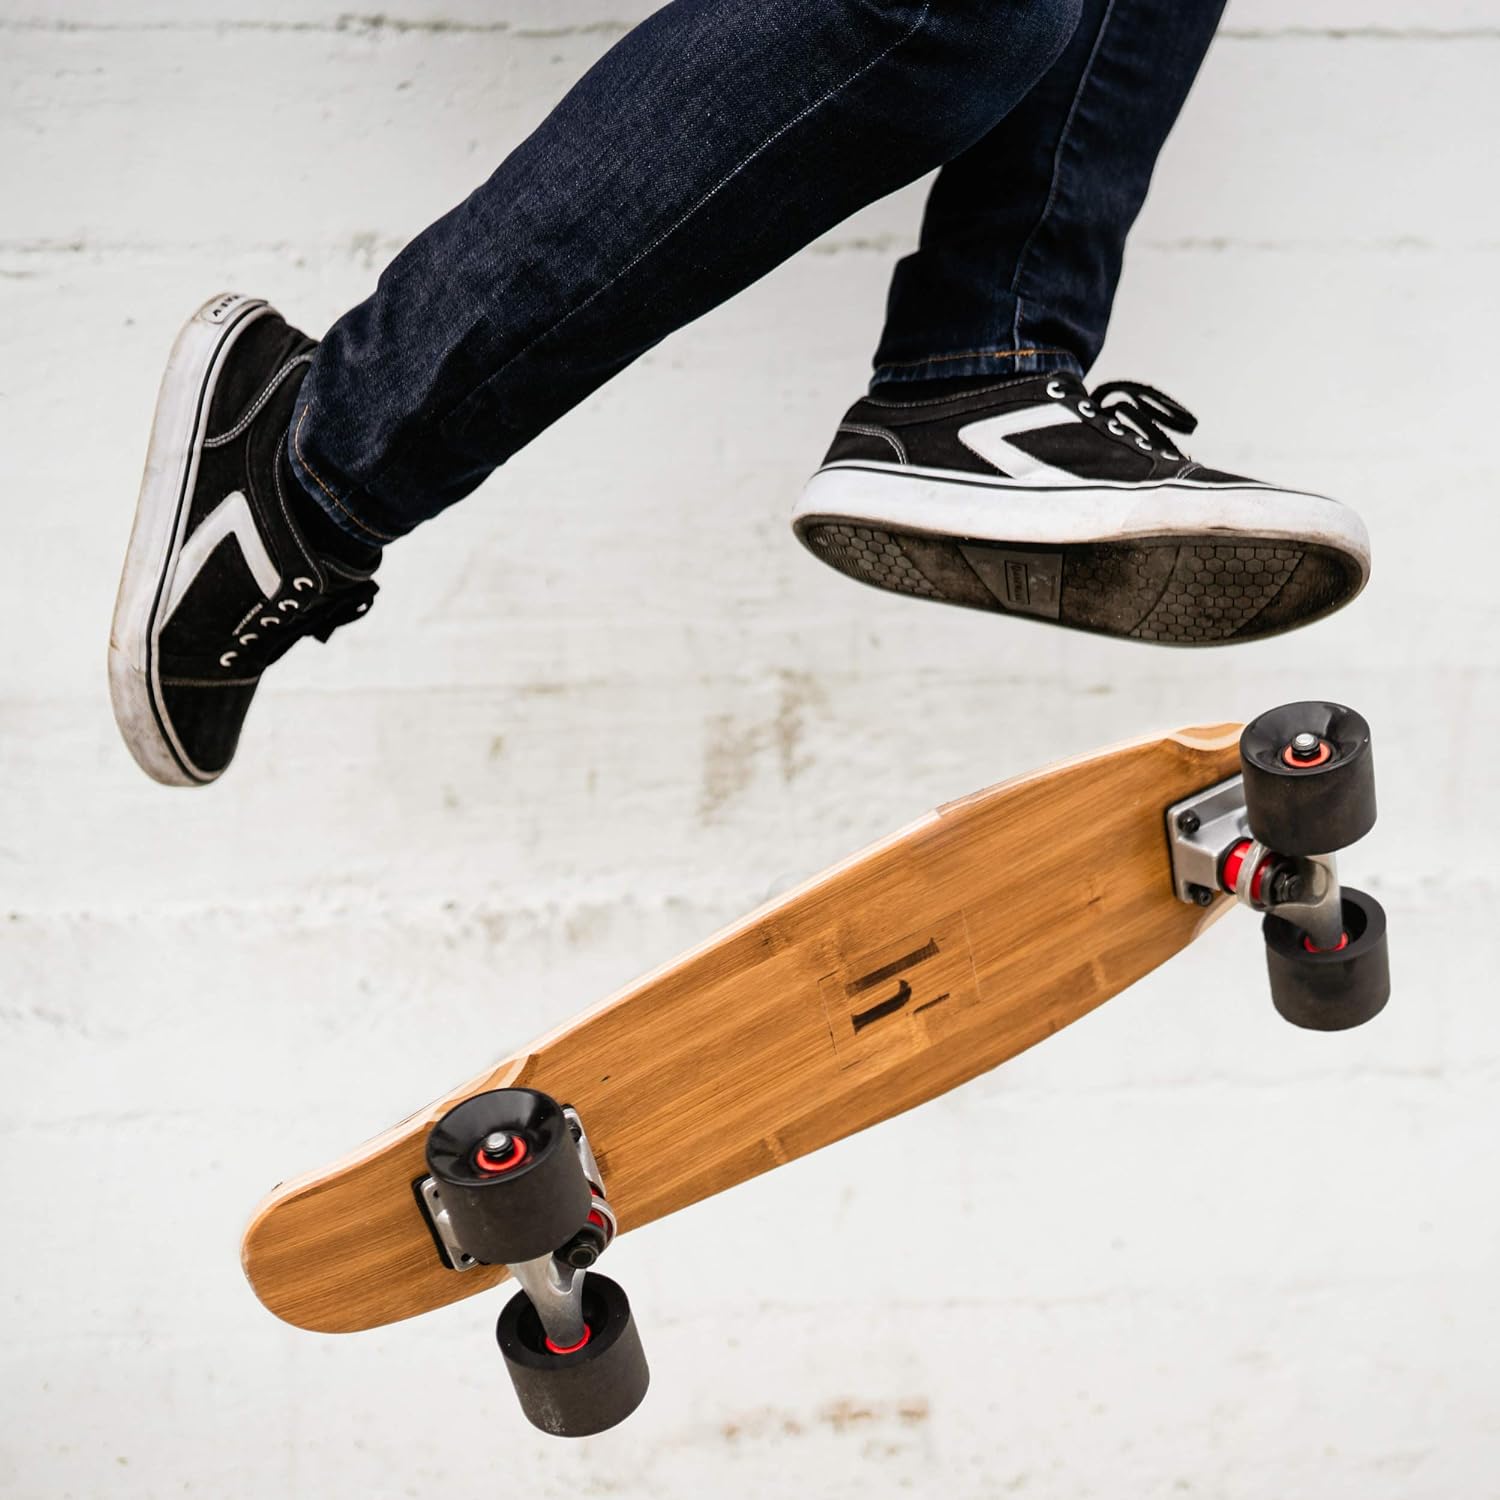 Haven T Essentials Complete 22 inch, 7 Ply Mini Cruiser Skateboard - Canadian Maple  Bamboo Deck, for Kids, Teens, and Adults, Anti-Skid, Waterproof, Lightweight